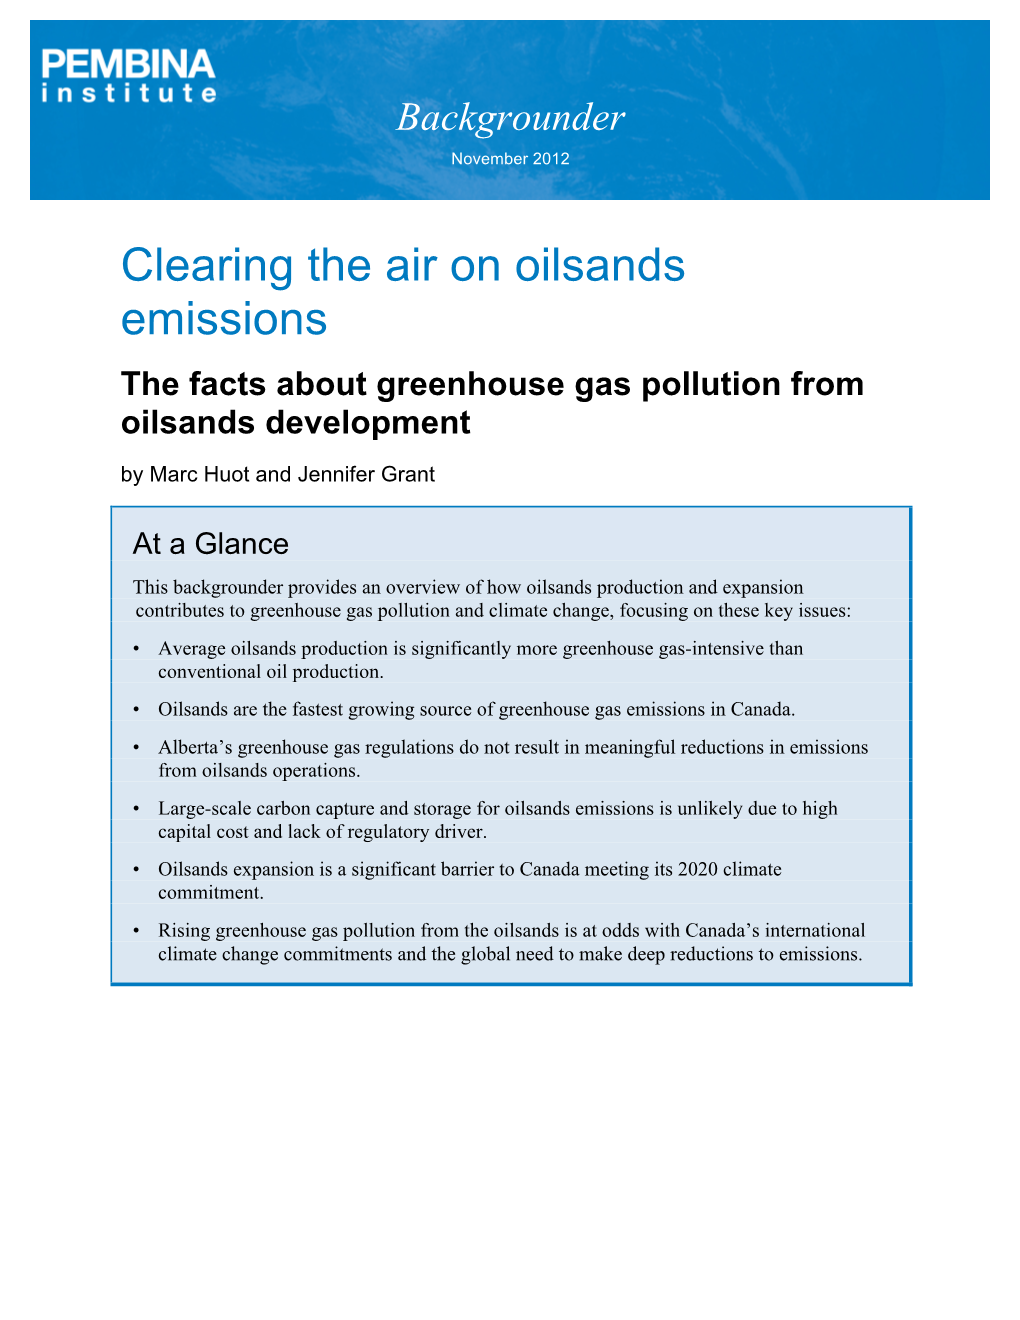 Clearing the Air on Oilsands Emissions the Facts About Greenhouse Gas Pollution from Oilsands Development by Marc Huot and Jennifer Grant